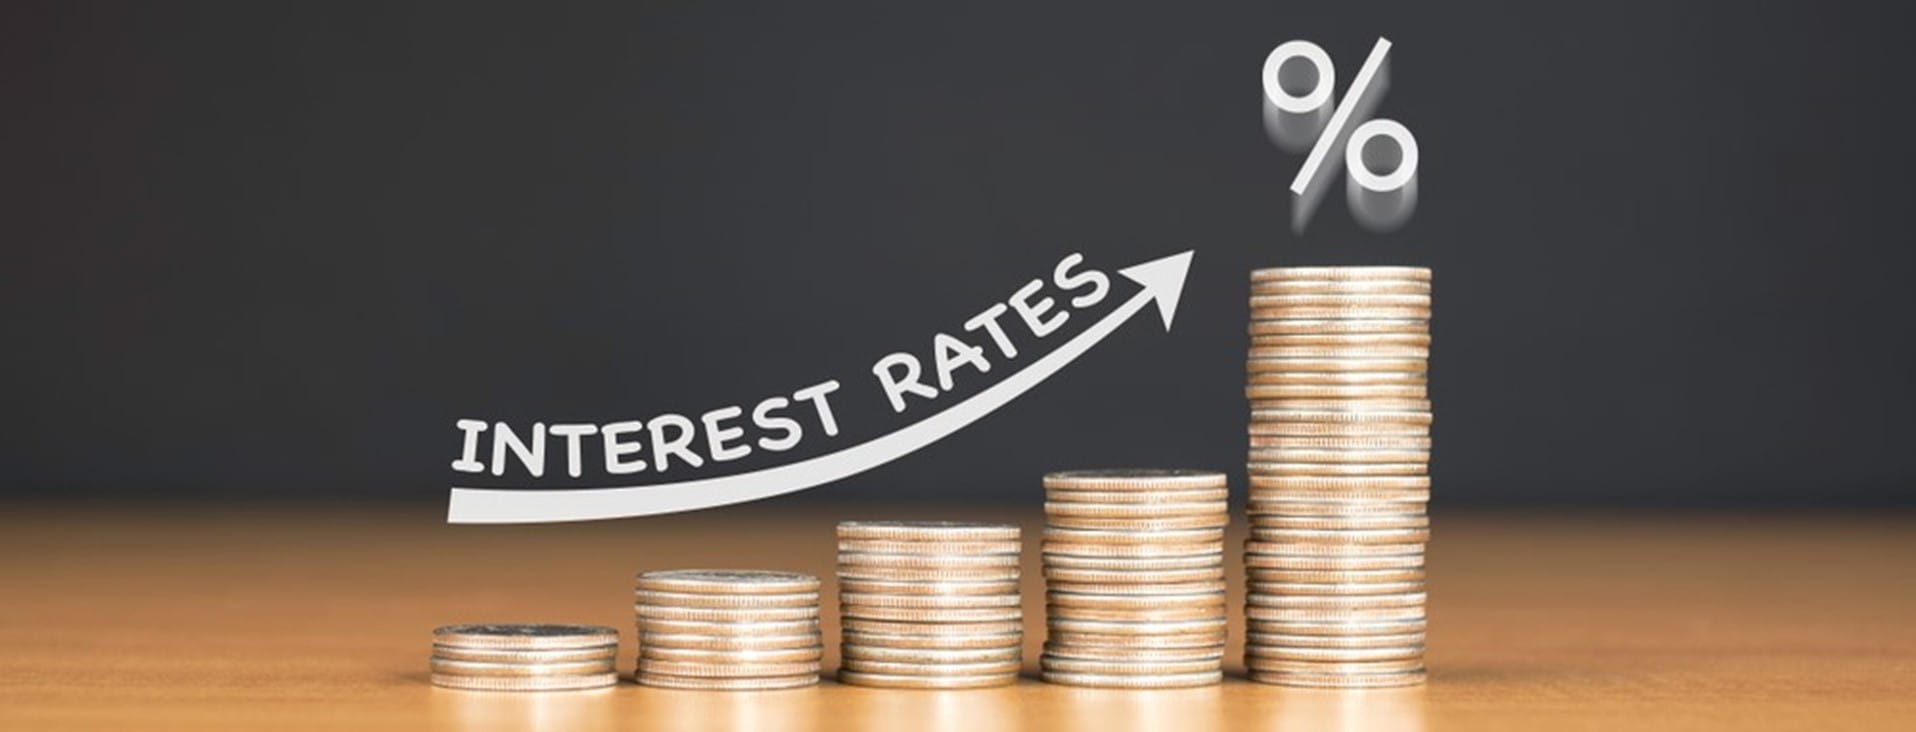 What to do with your debt with interest rates rising?